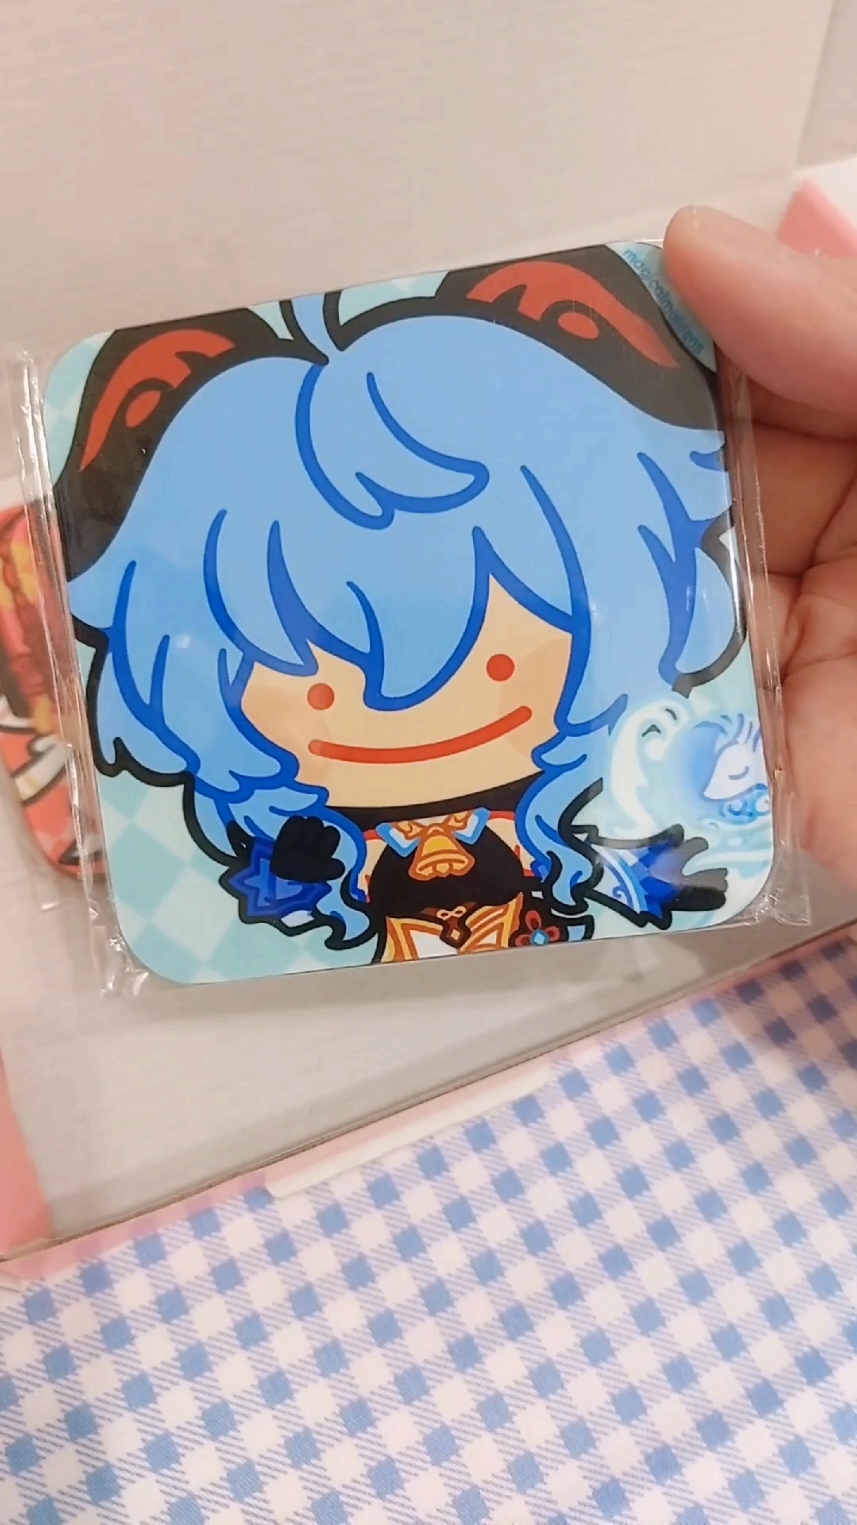 Cute and quick genshin merch vid for Emily!! :) I'm currently preparing for Megacon Live in Manchester, you'll see goodies like these there and much more too! #orderpacking #genshinmerch #ganyumain #ganyu #yanfei #hutao #hoyofair #GenshinImpact 